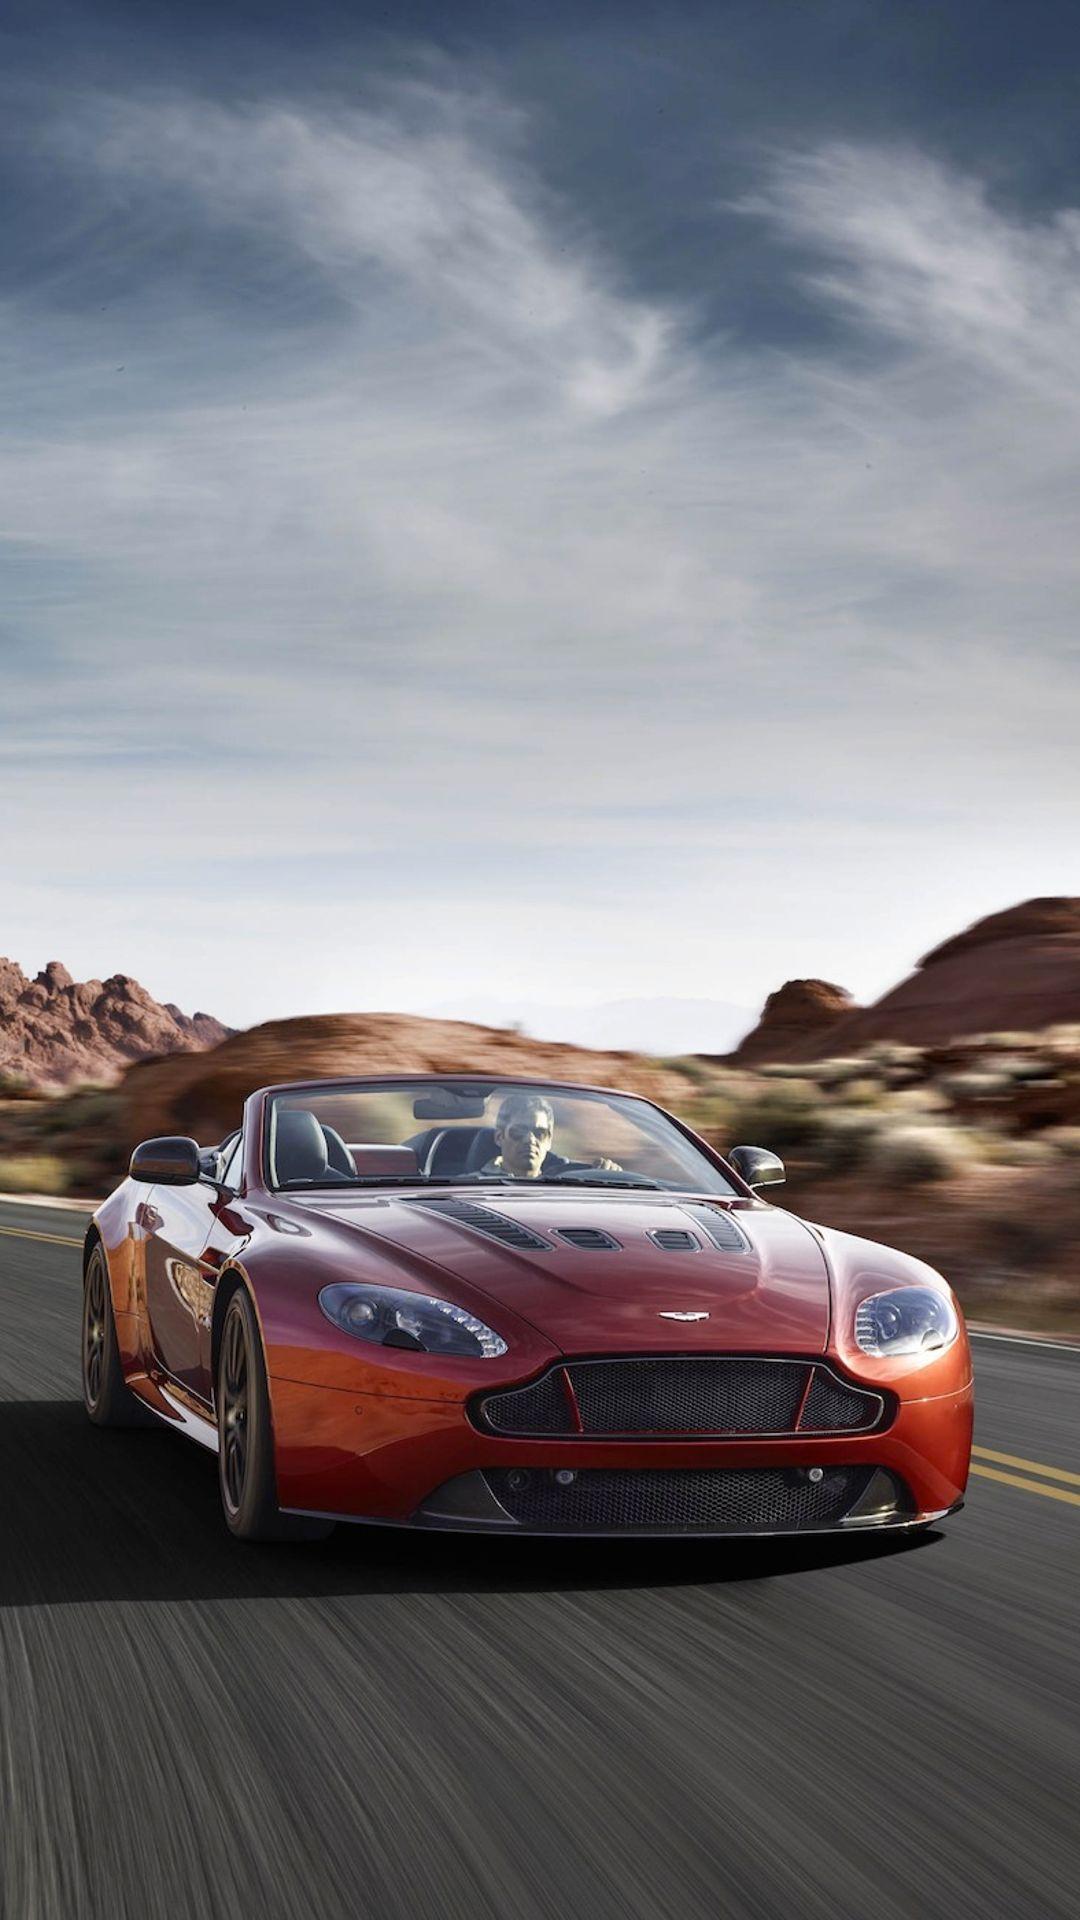 These Aston Martin V12 Vantage S Roadster Mobile And Desktop Wallpaper Are Almost NSFW